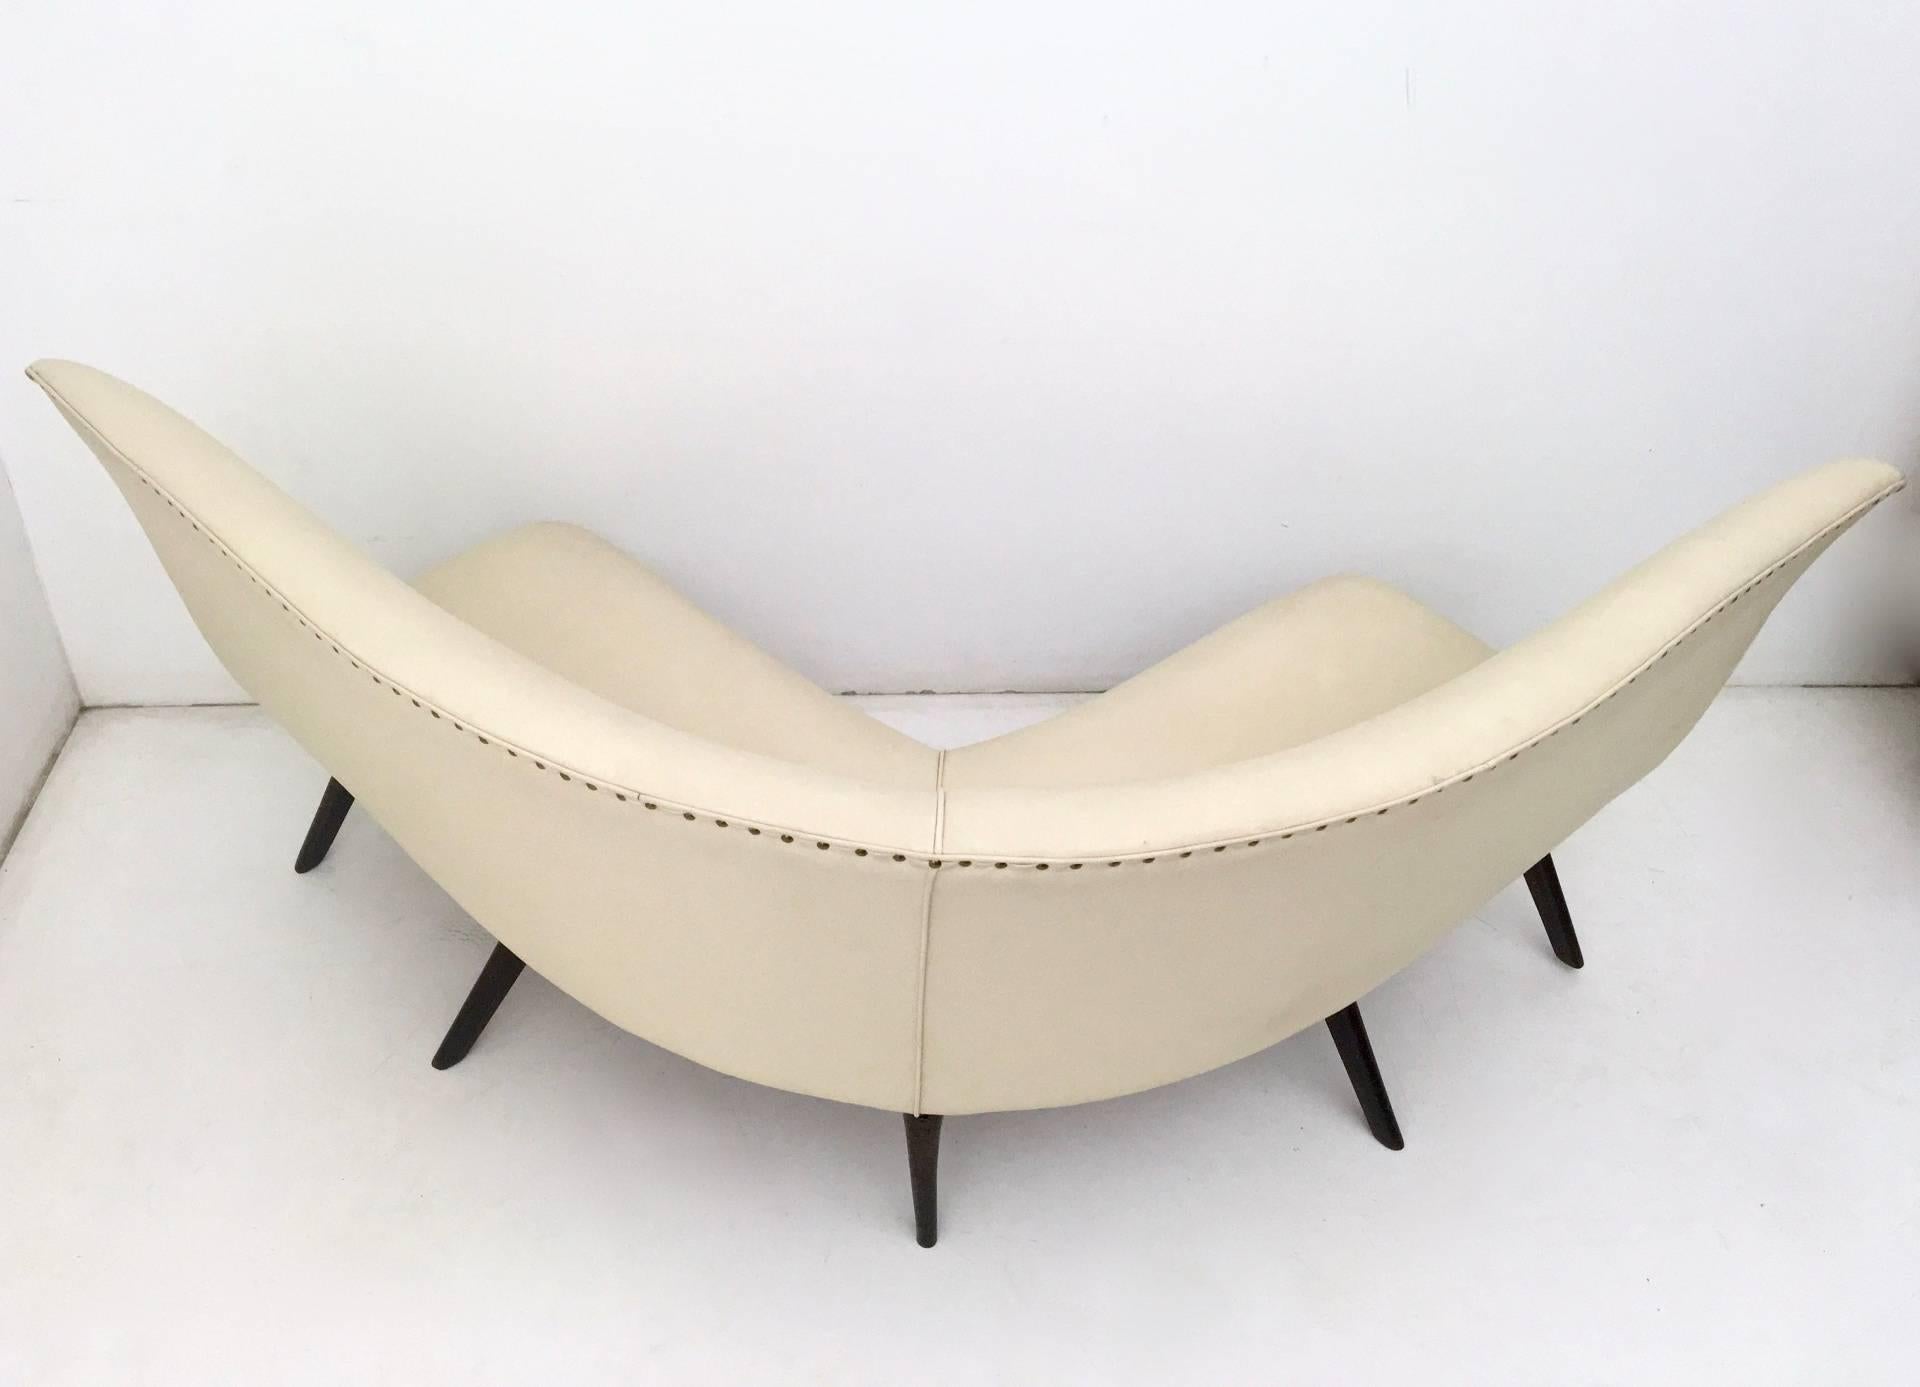 Made in Italy, 1950s.
It features a wooden structure, which is padded and upholstered in ivory skai and brass details. 
This sofa is a vintage piece, therefore it might show slight traces of use, but it can be considered as in excellent original